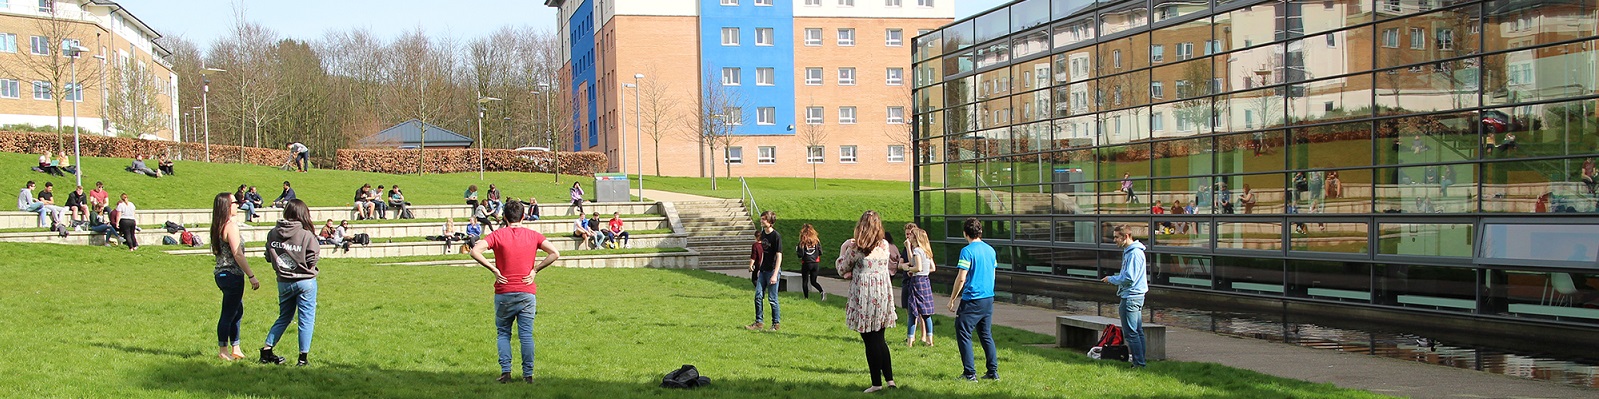 Young people socialising outside on the grass .